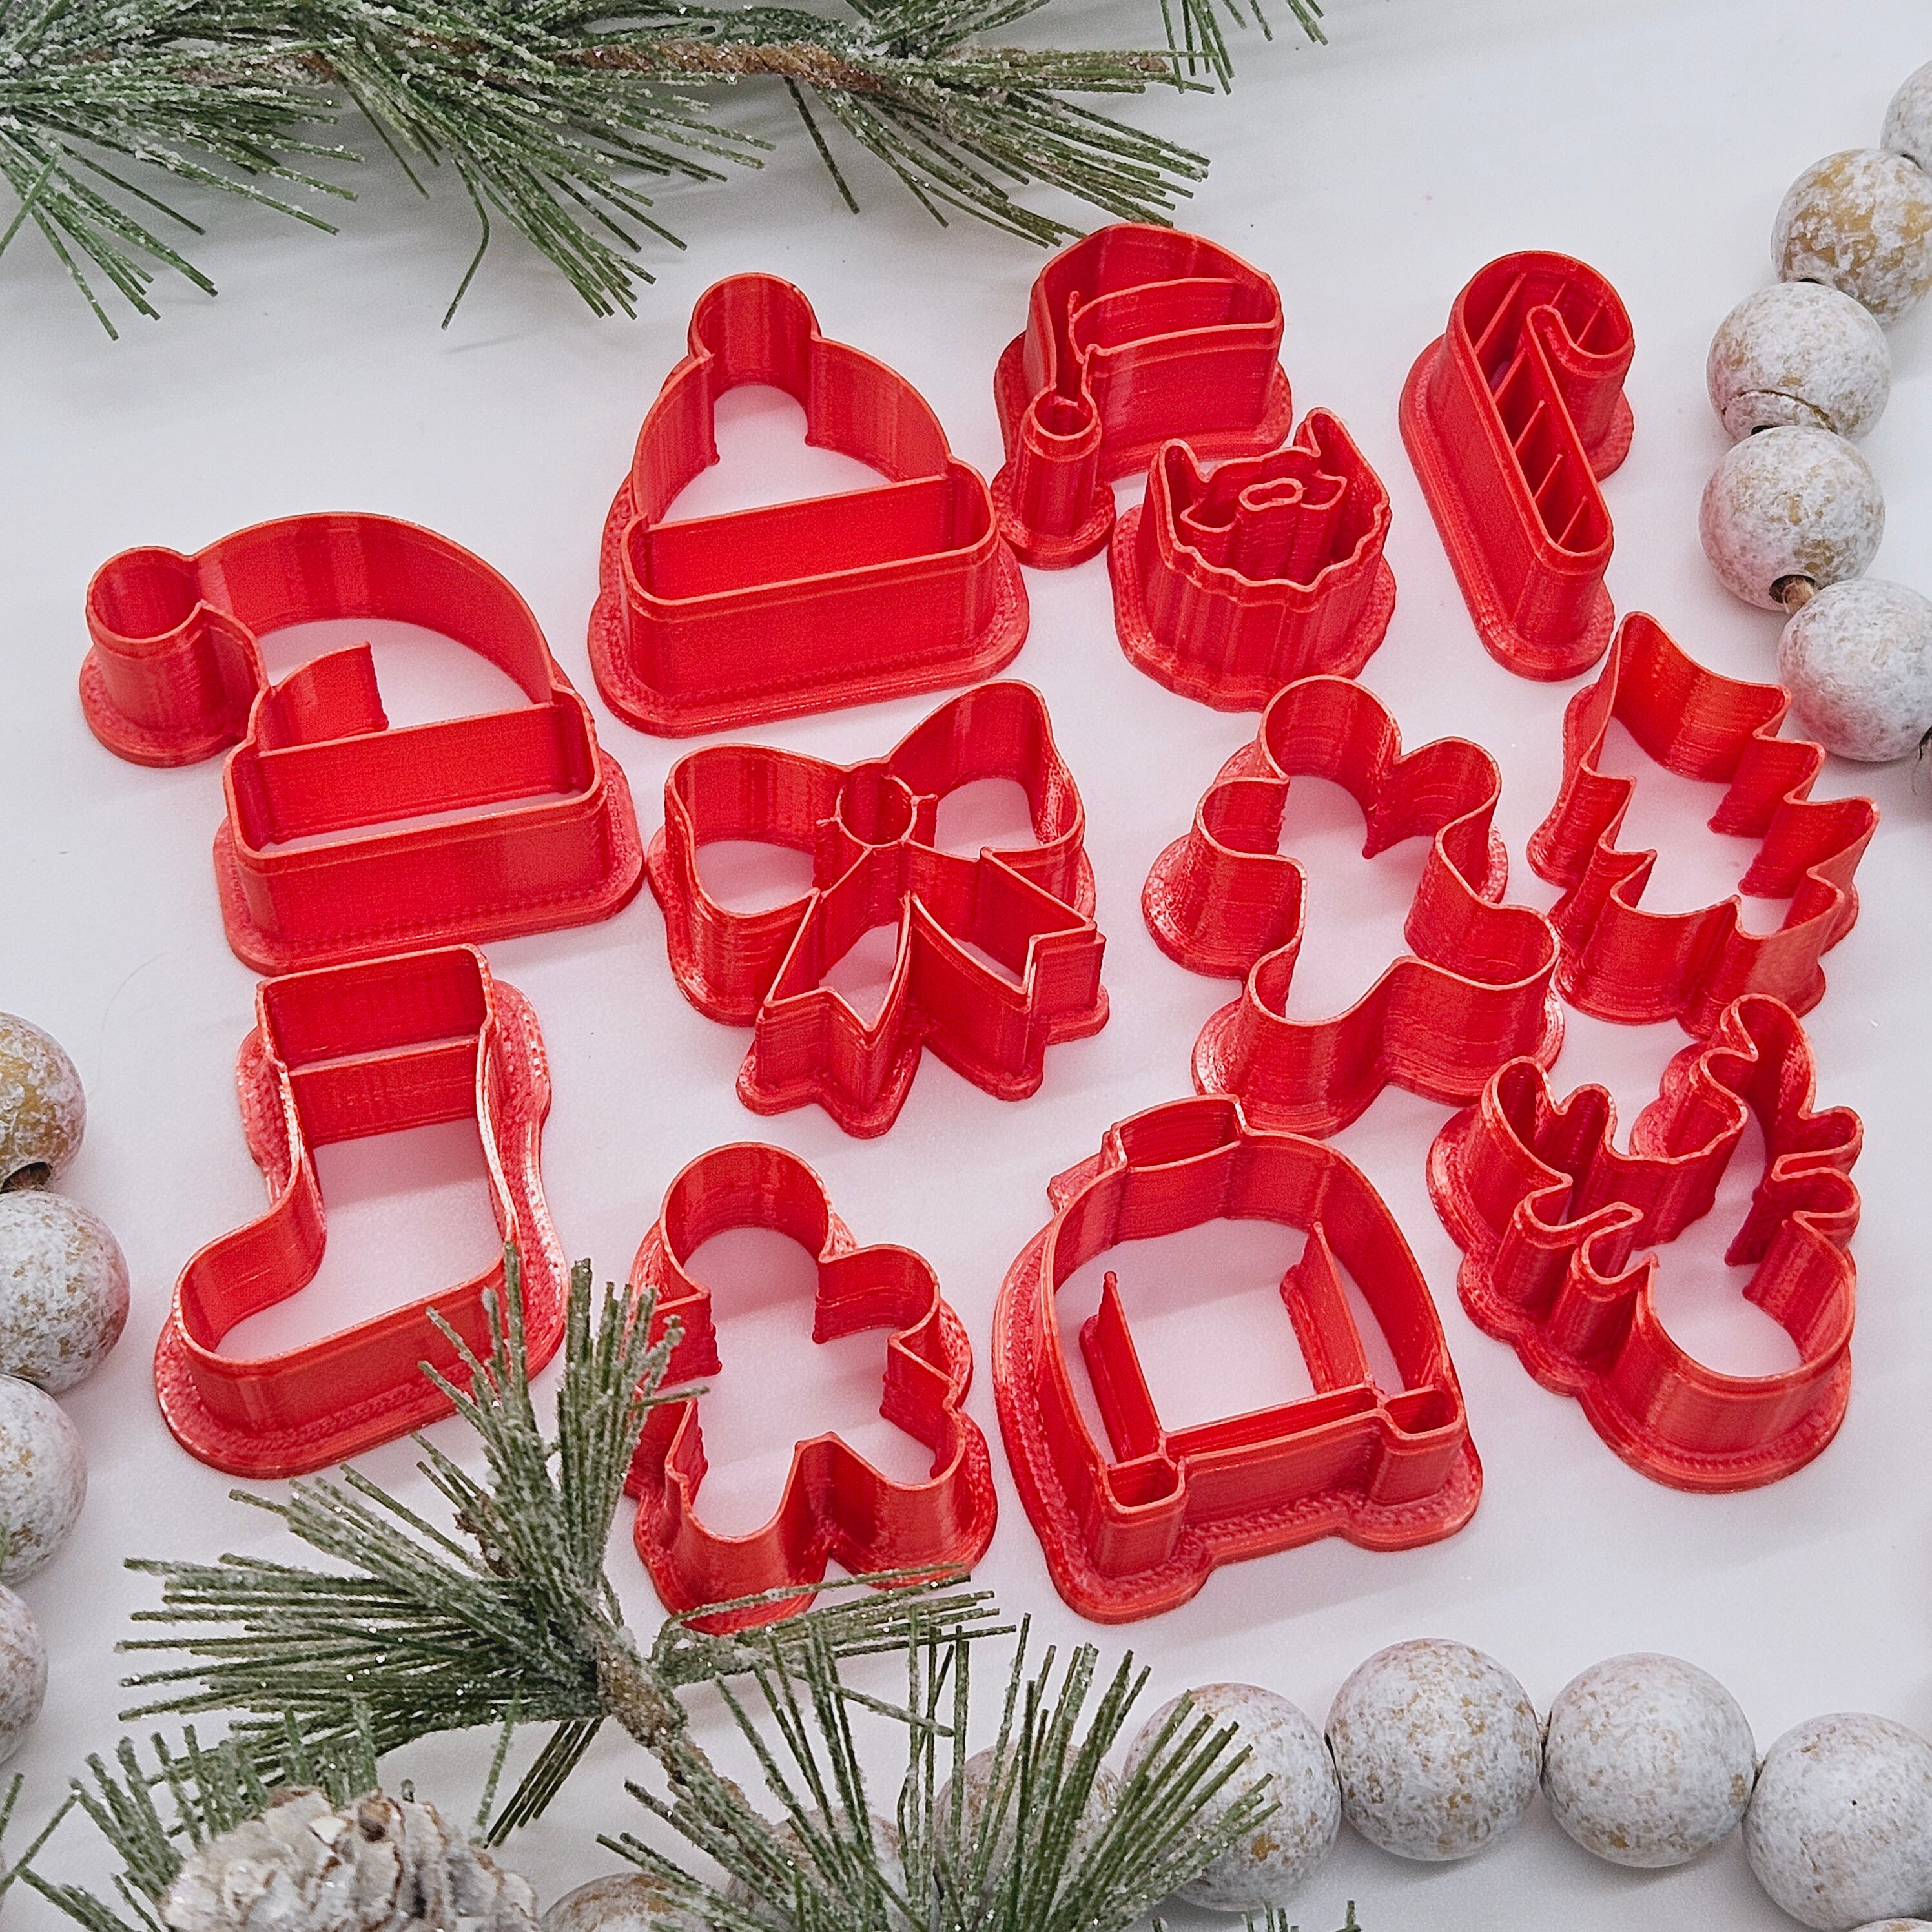 KEOKER Christmas Clay Cutters, Winter Polymer Clay Cutters for